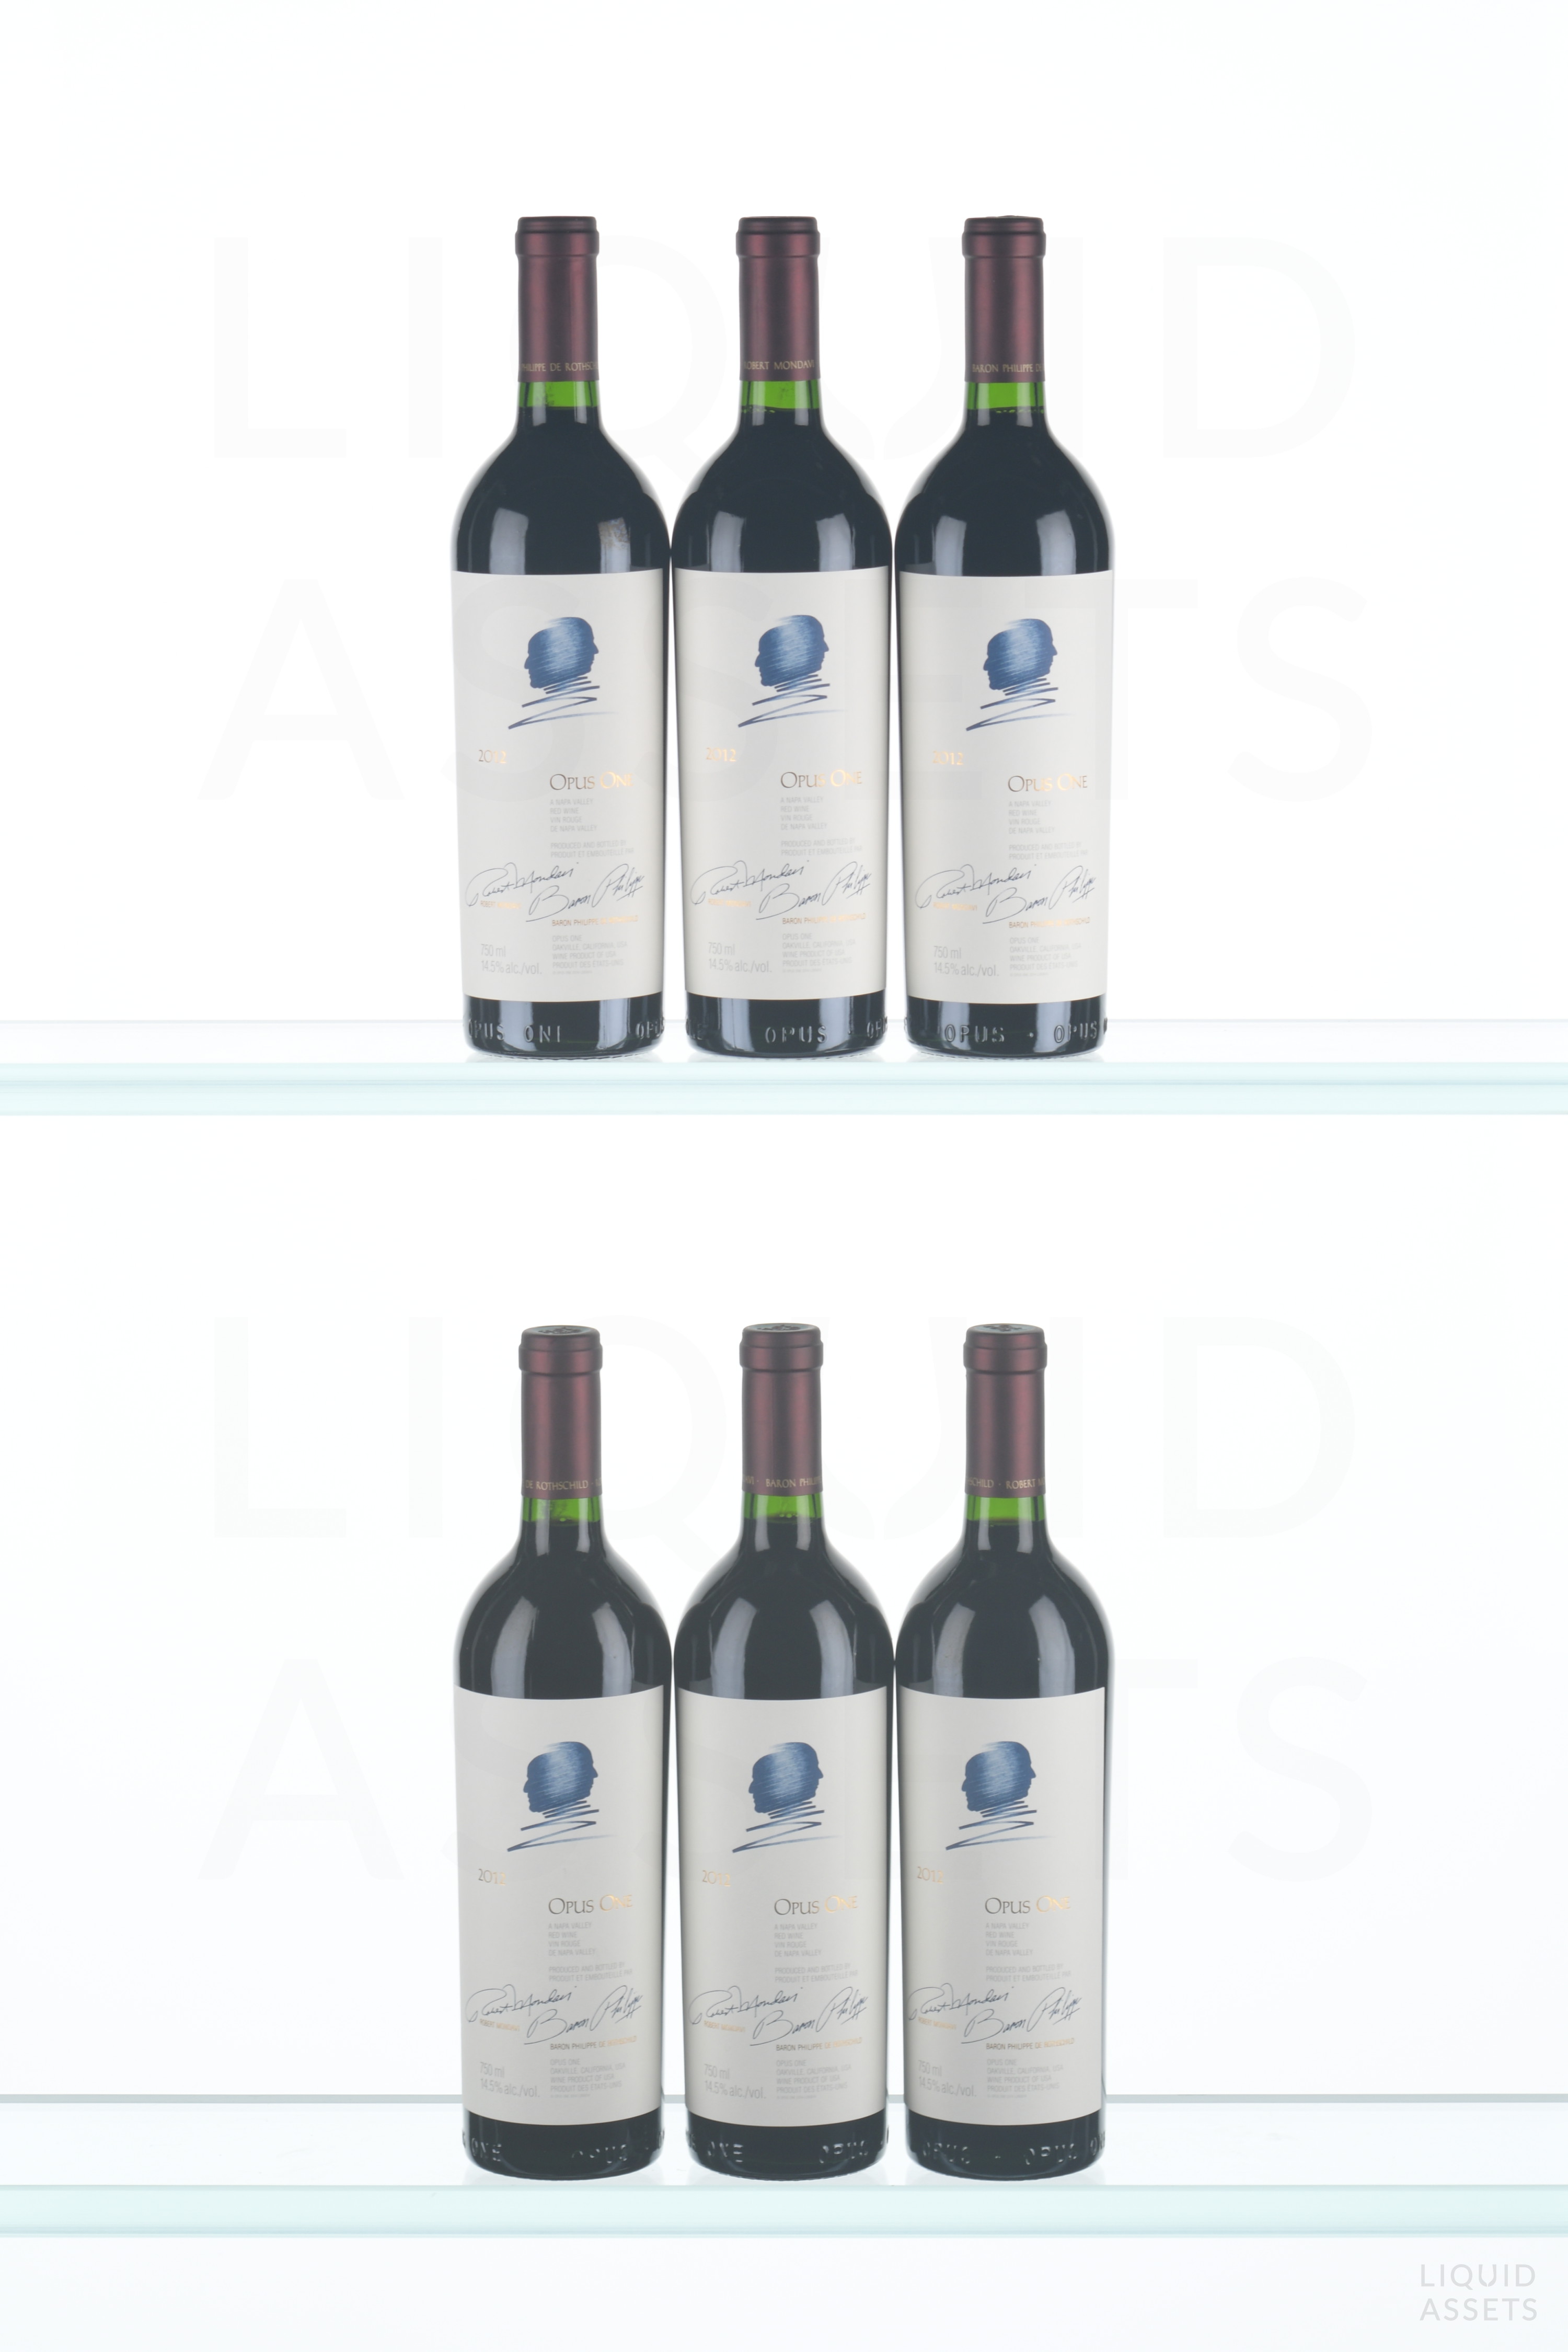 opus one 2012 review